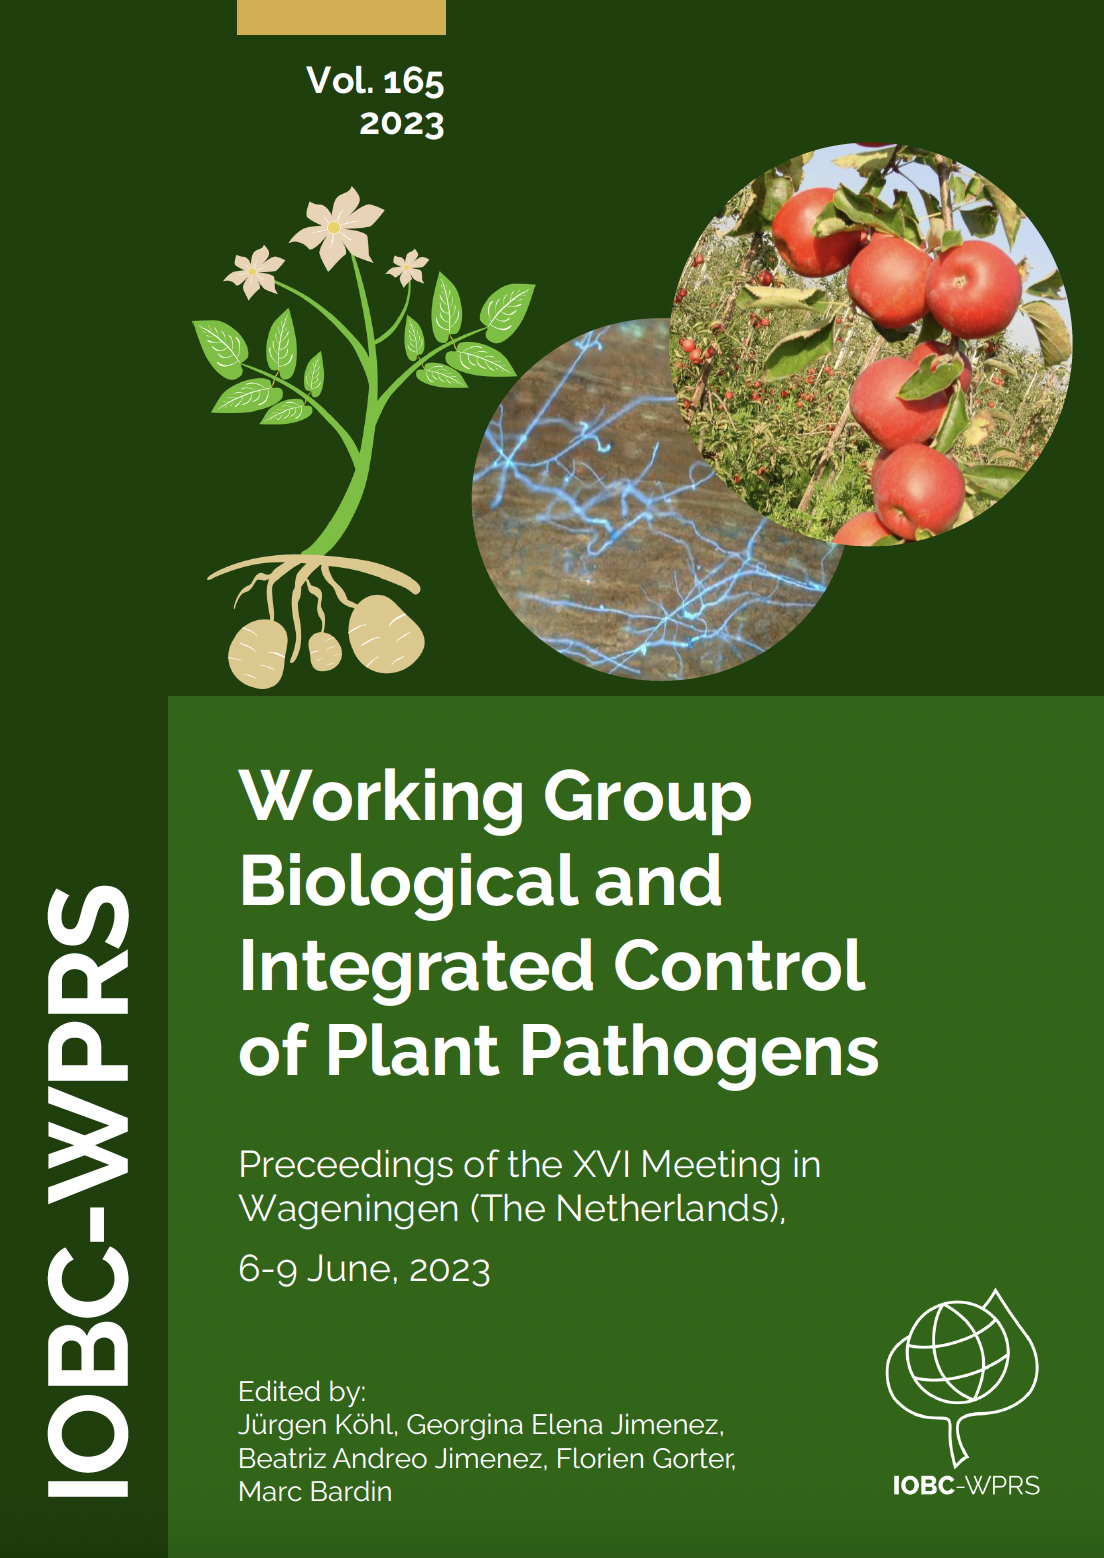 New Bulletin: Biological and Integrated Control of Plant Pathogens